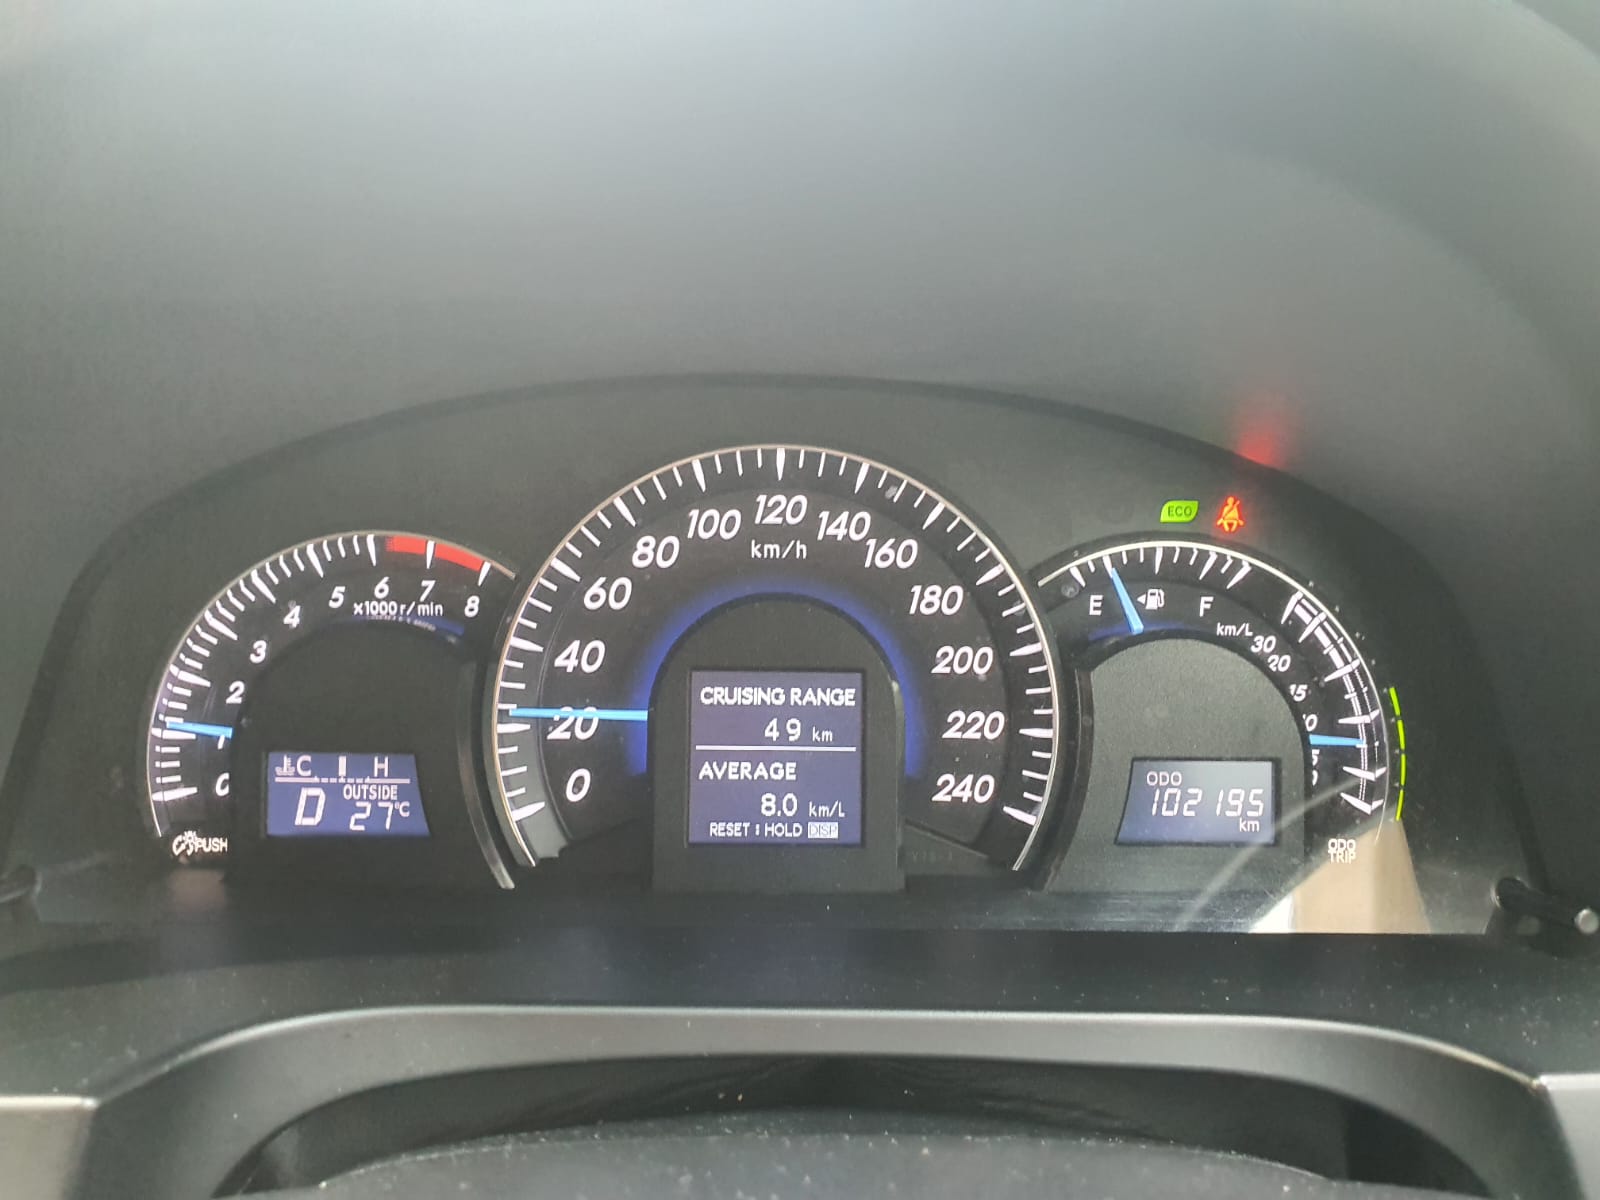 TOYOTA CAMRY 2.5L V AT 2013